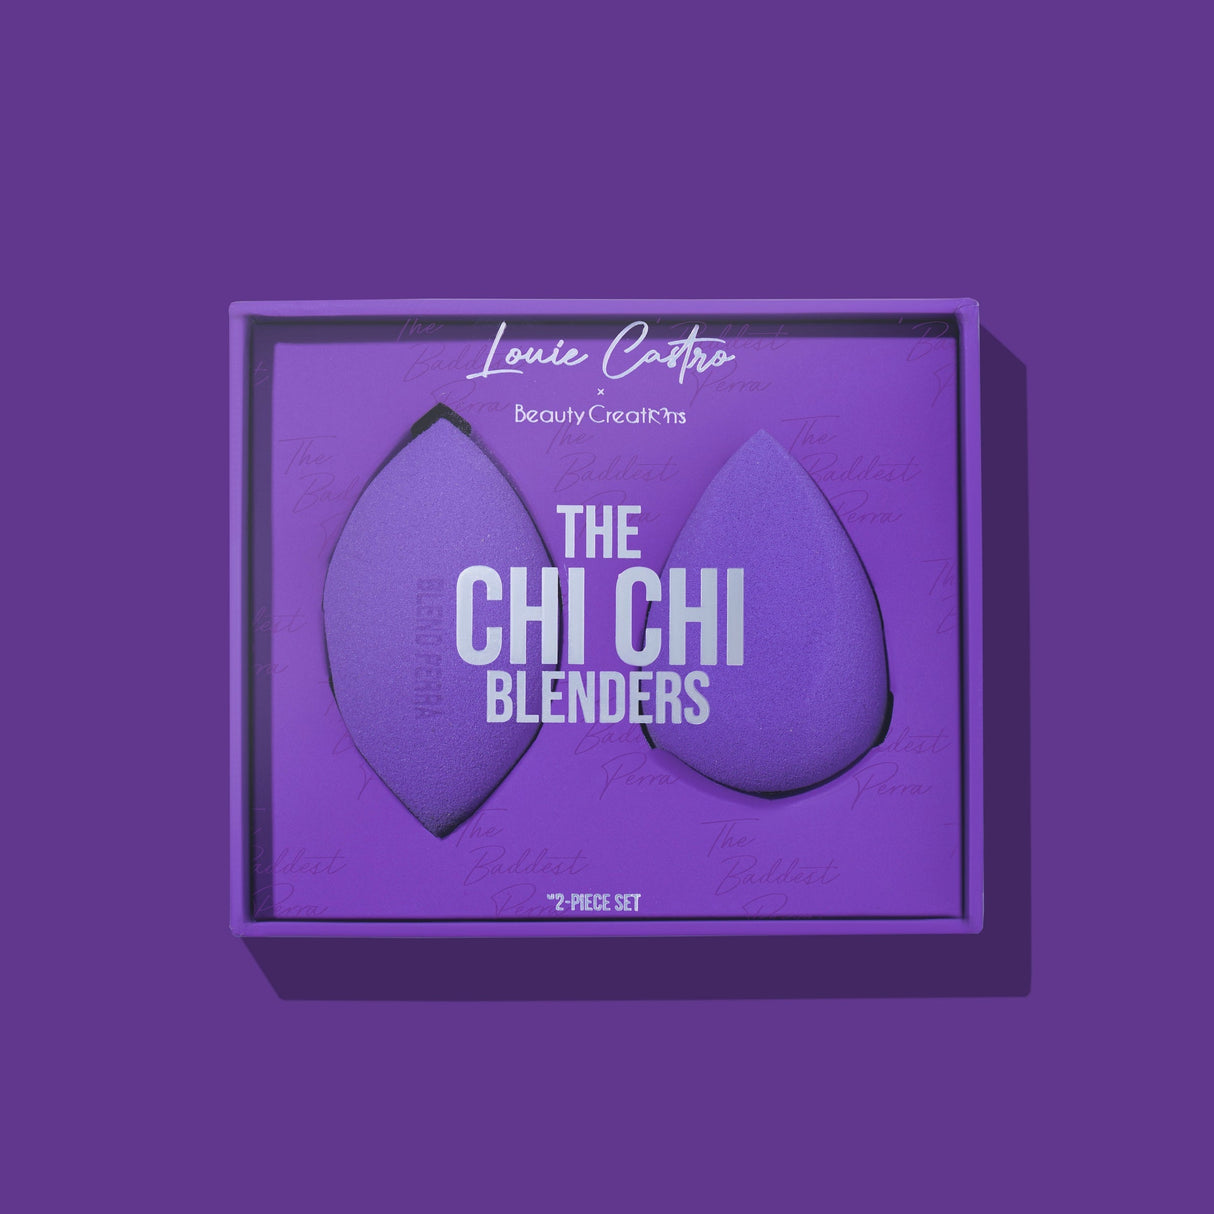 BEAUTY CREATIONS - LOUIE CASTRO  - THE CHI CHI BLENDERS DUO